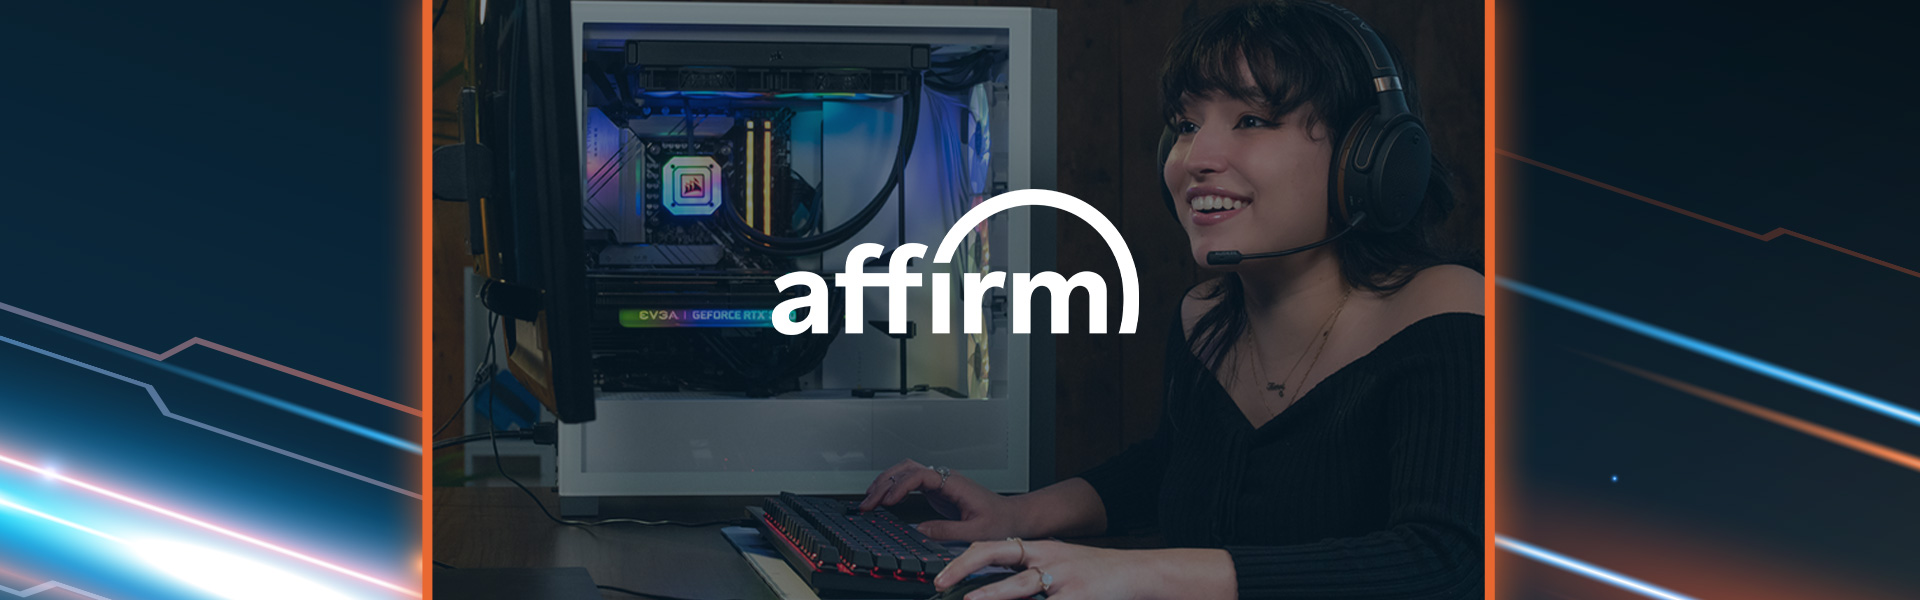 Newegg and Affirm Offer 15% Off Deal for All Advanced Battlestations (ABS) PC Systems